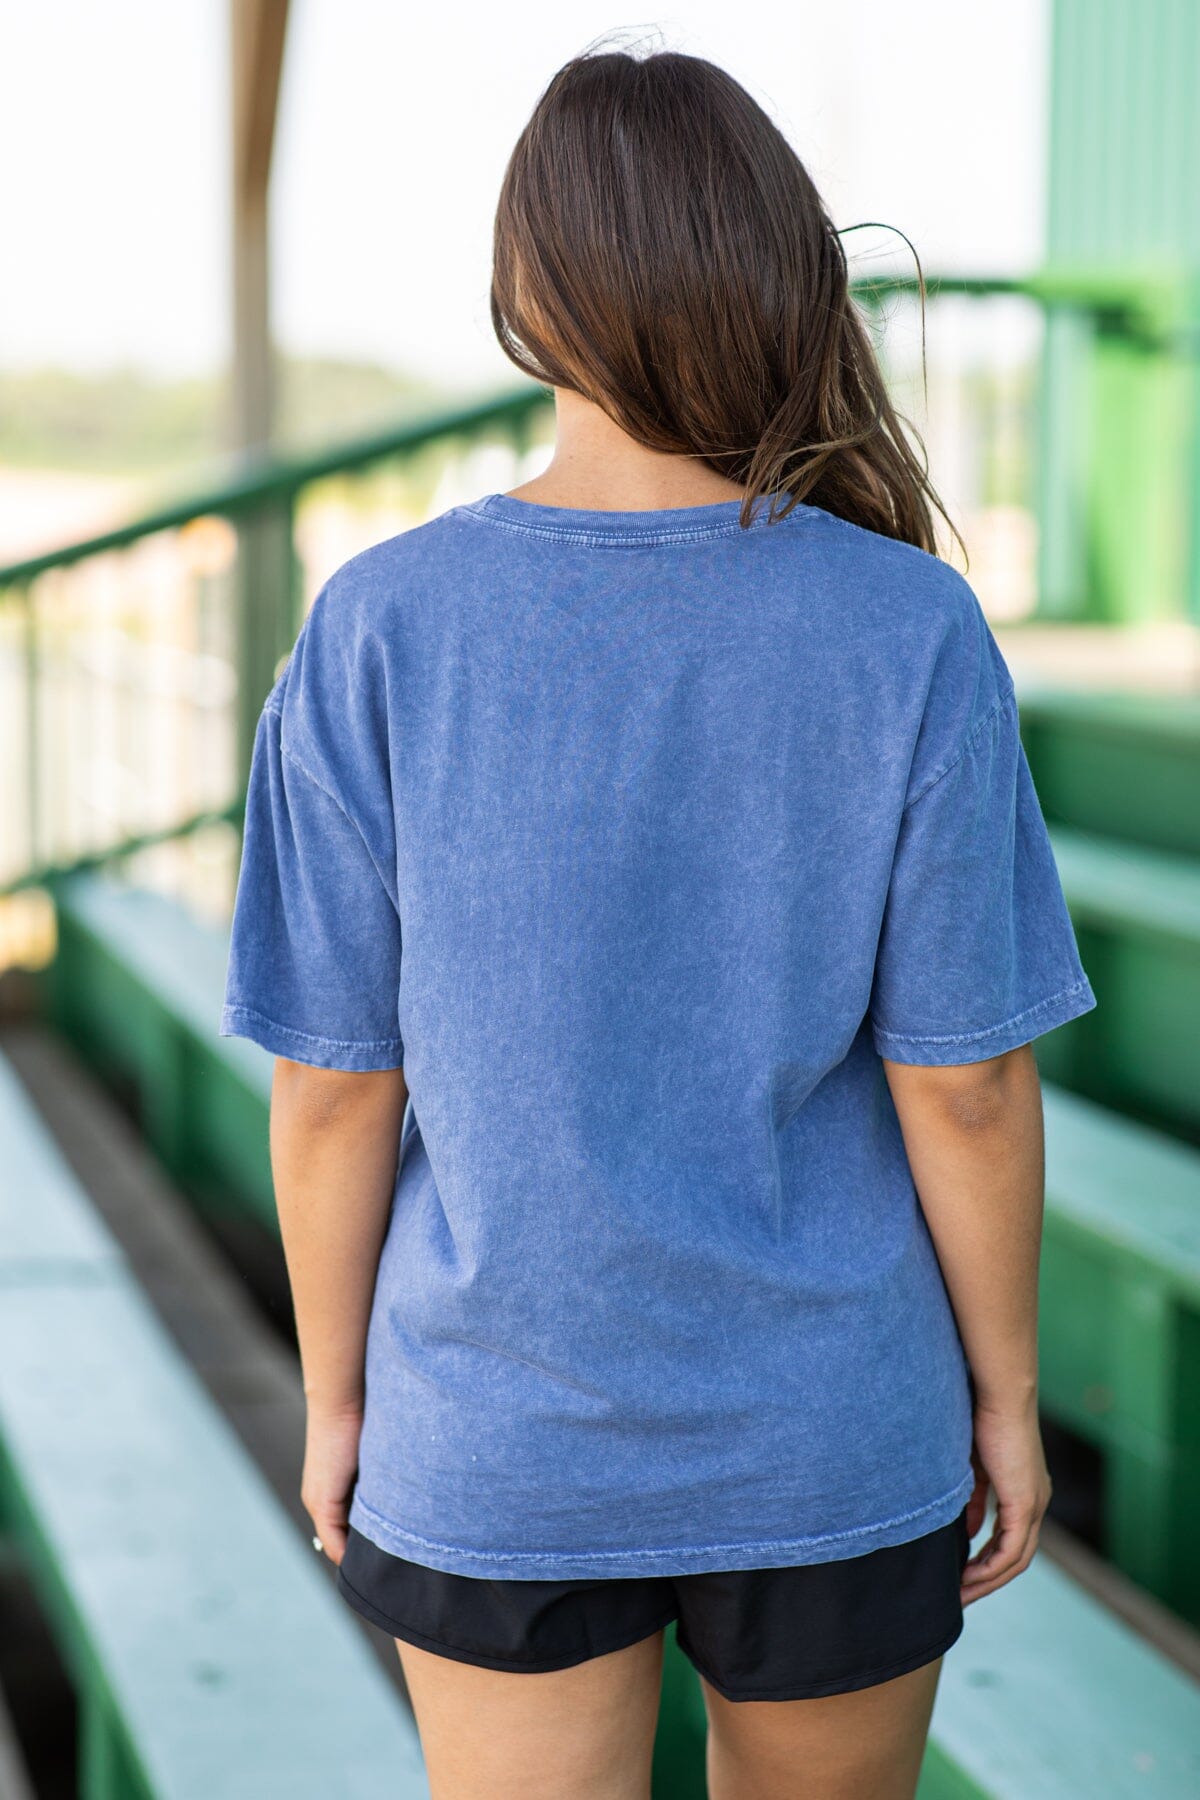 Slate Blue Washed Soccer Mom Graphic Tee - Filly Flair